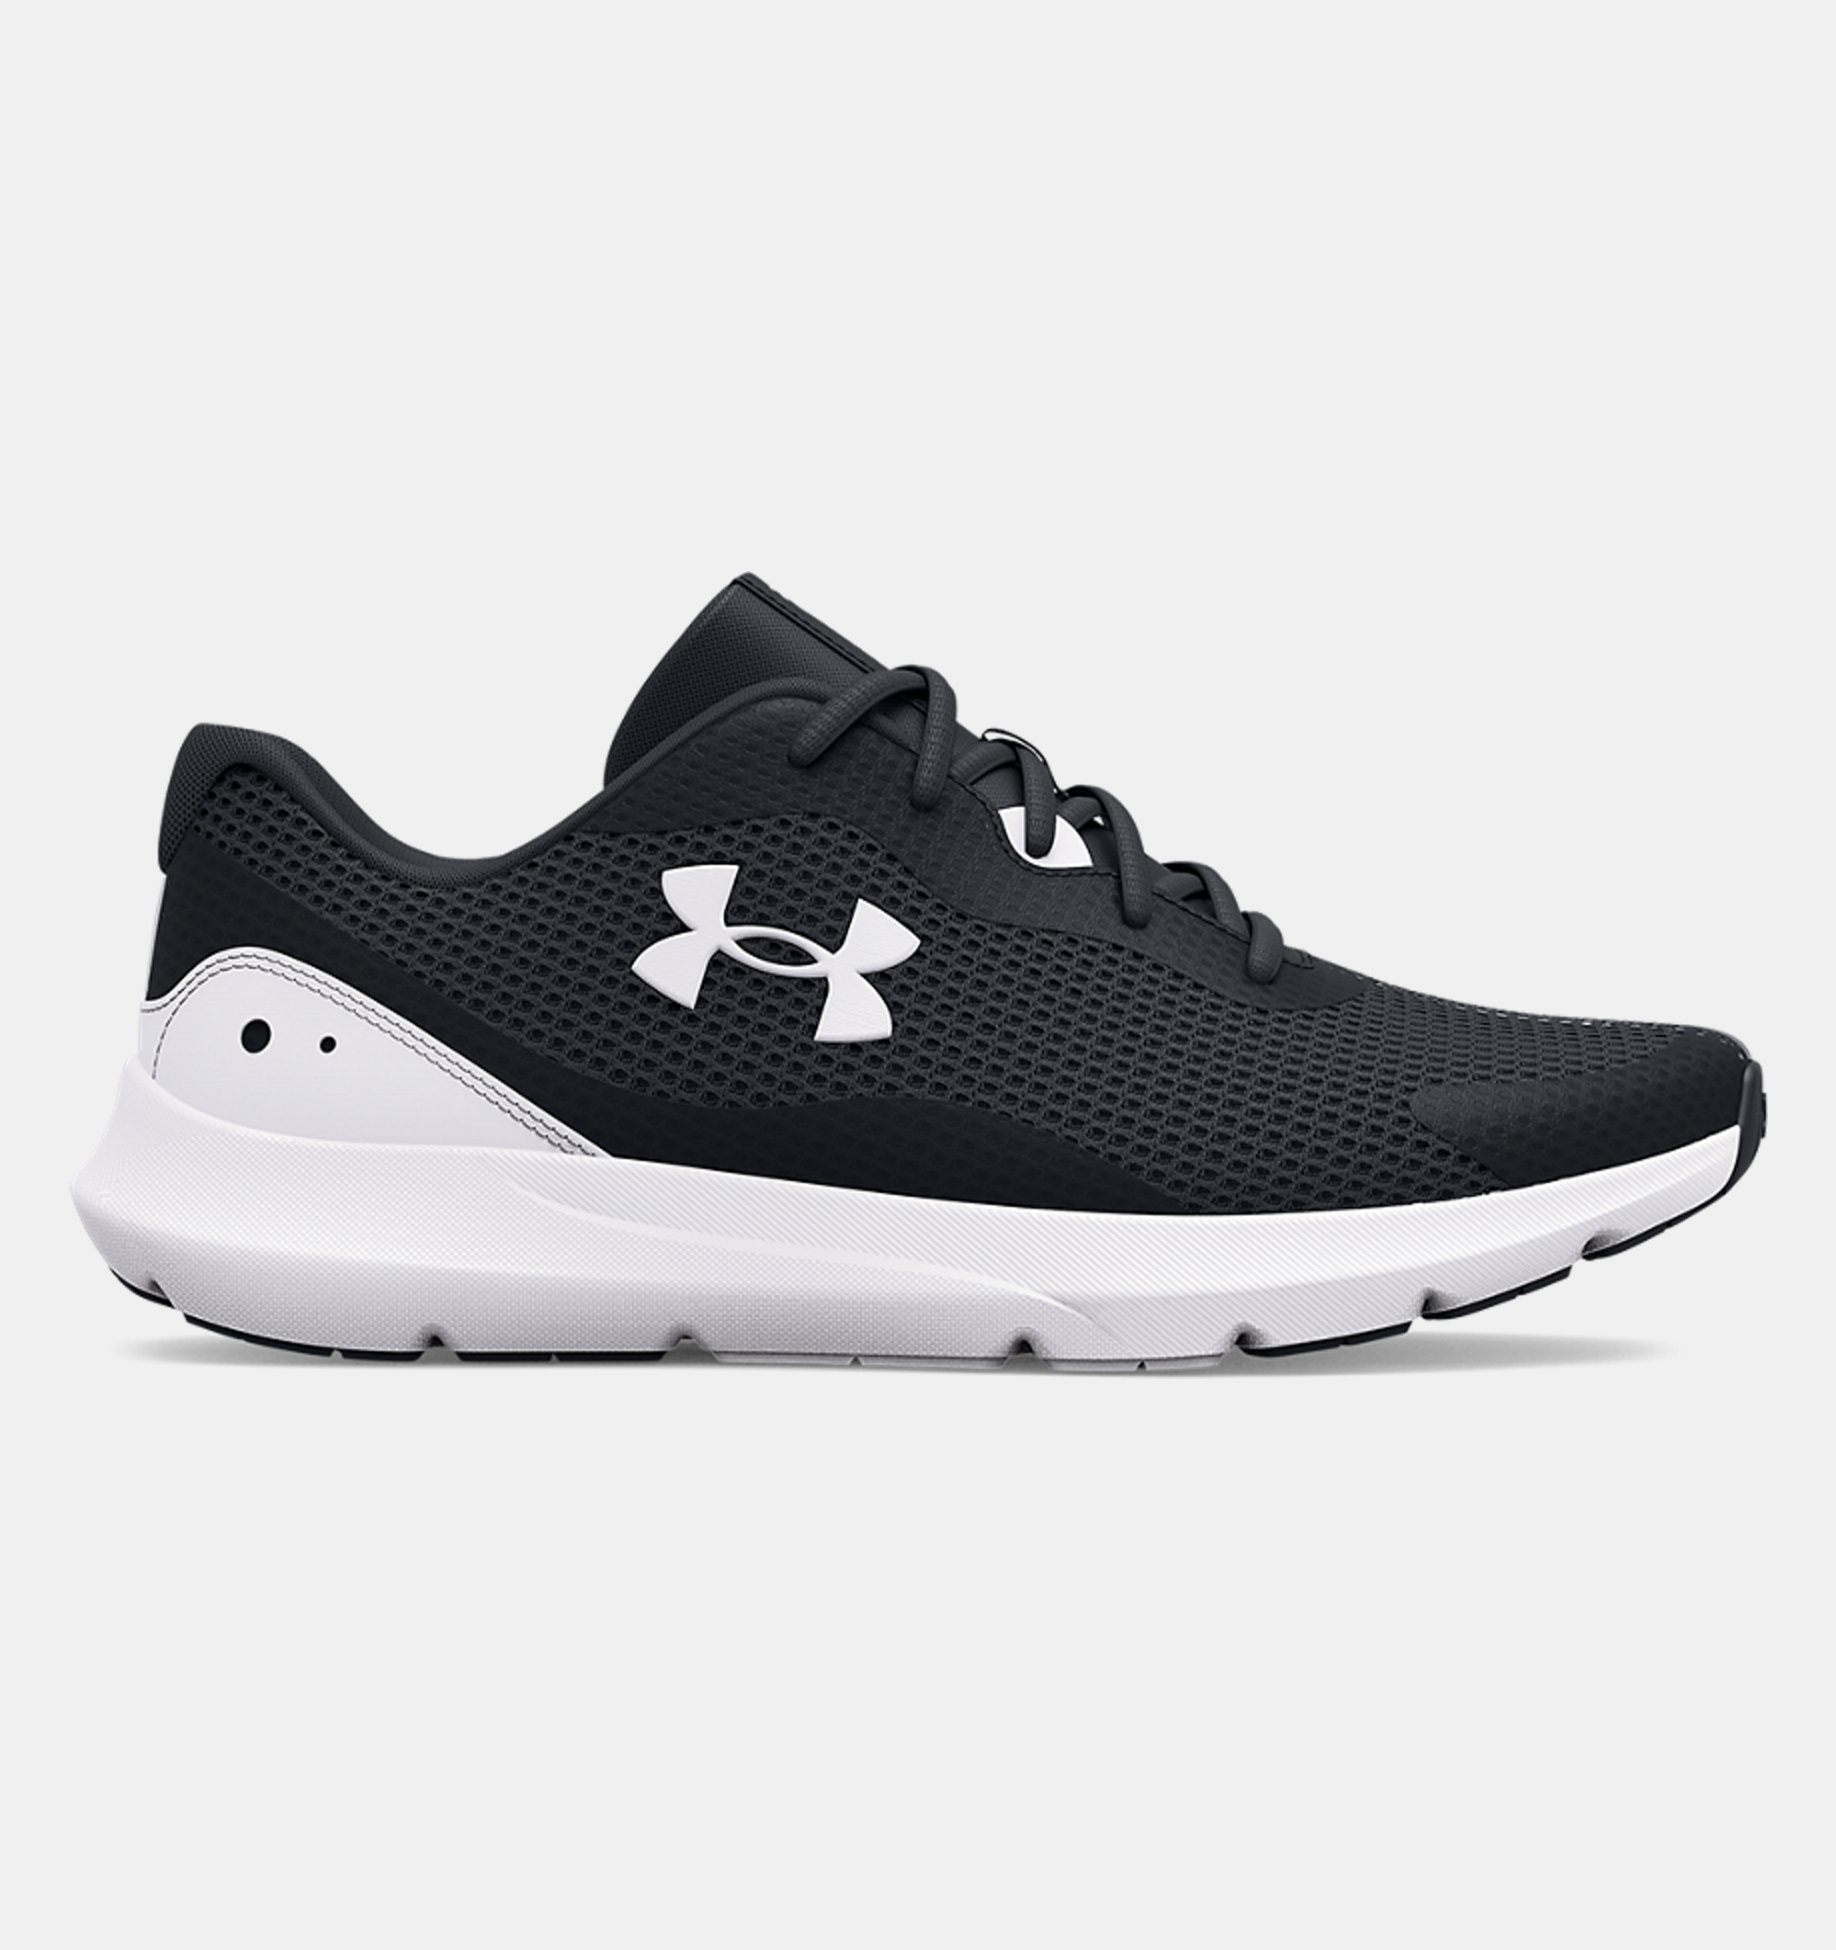 Under Armour Mens Surge Special Edition Running Shoe 